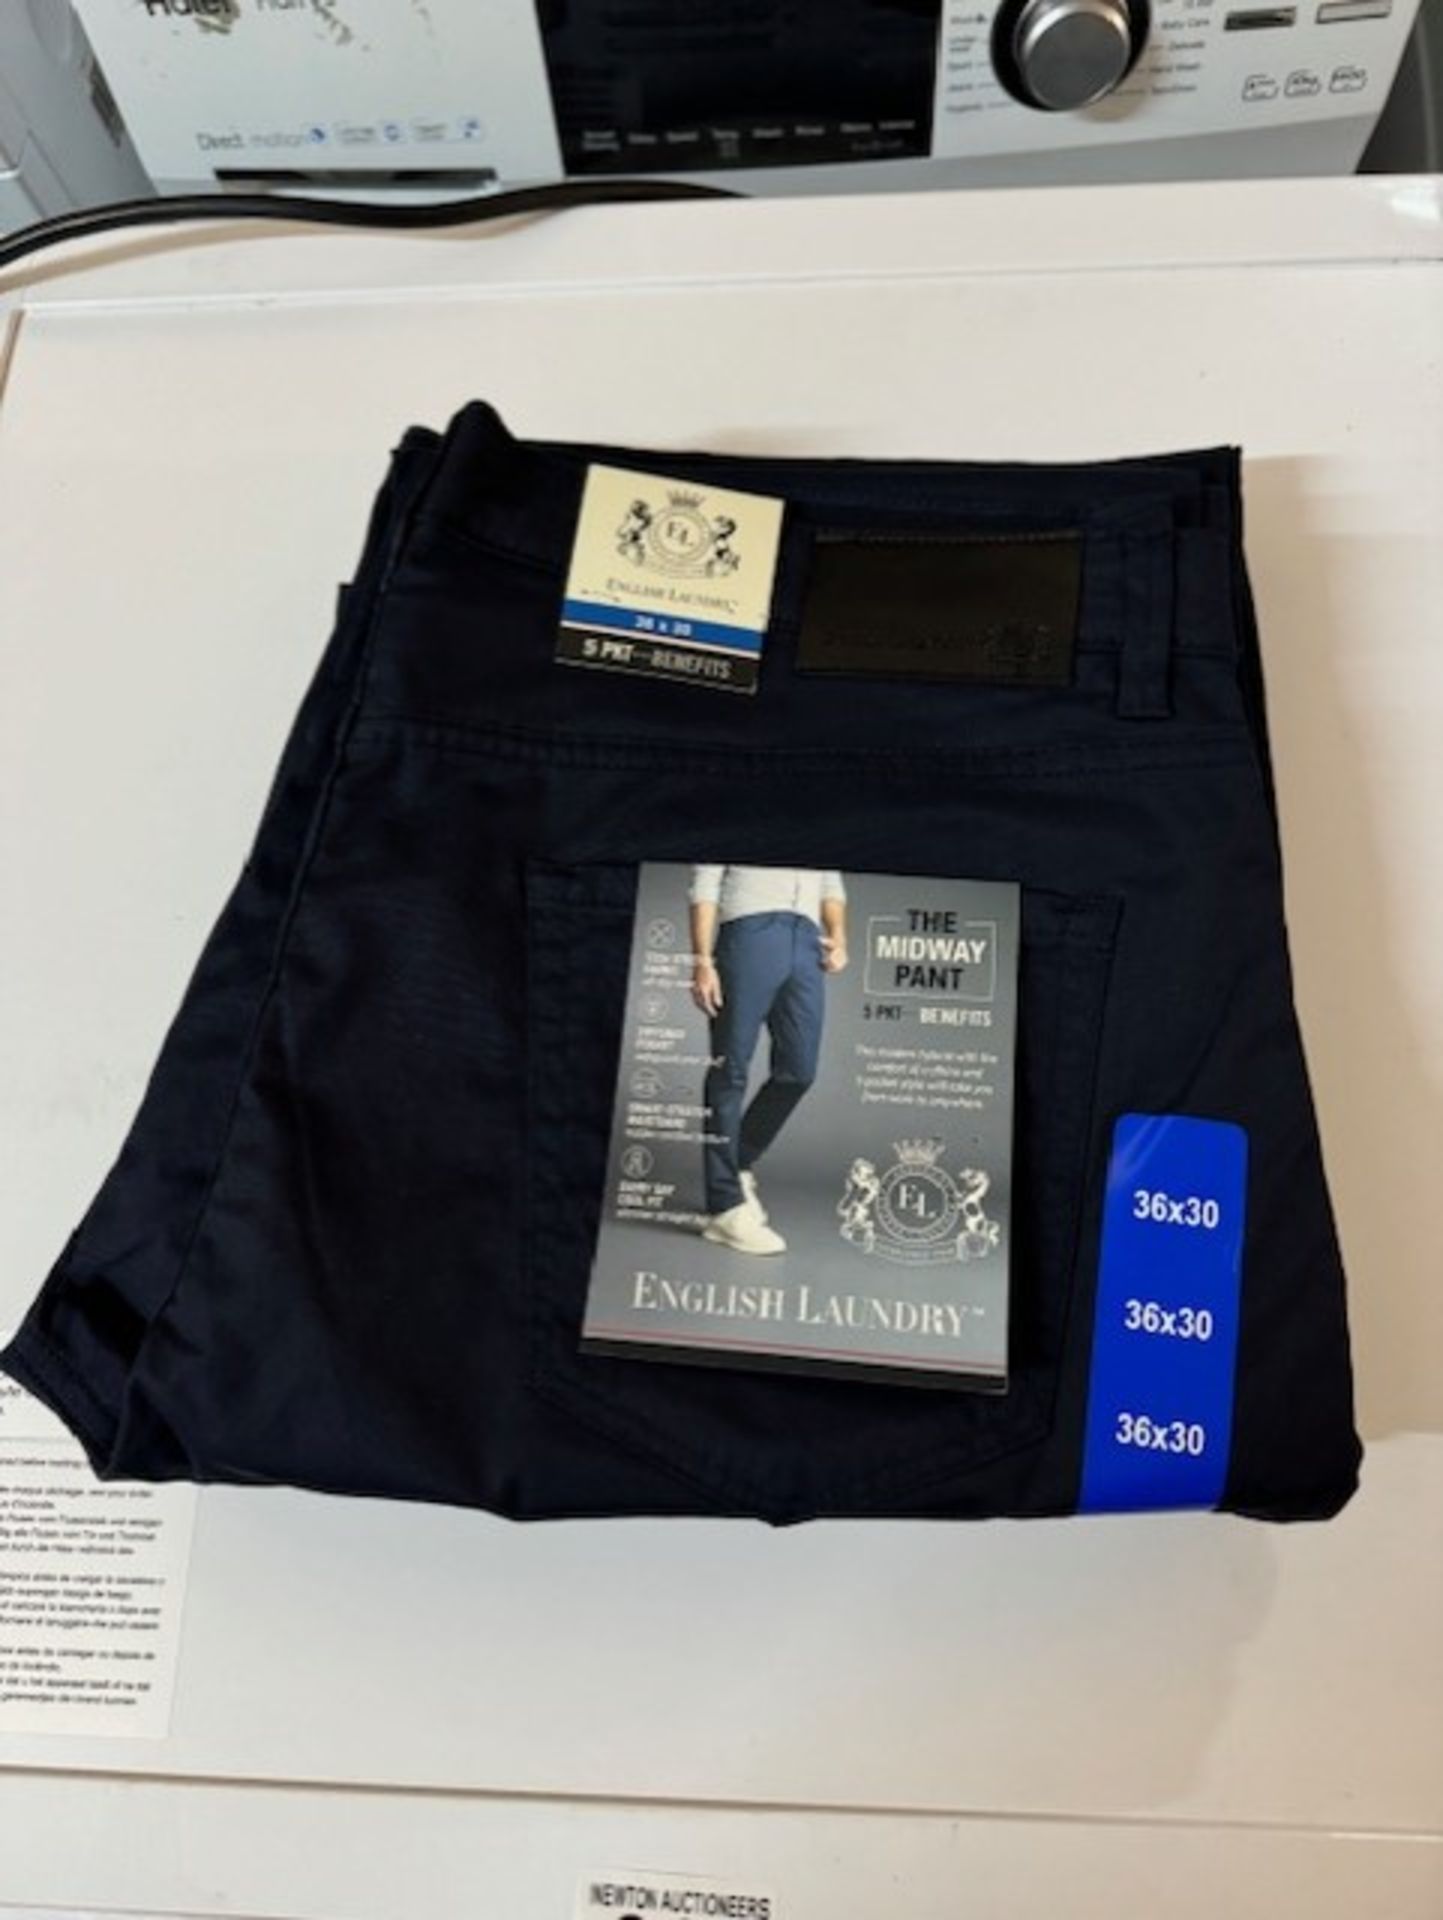 1 BRAND NEW MENS ENGLISH LAUNDRY STRETCH FABRIC PANTS IN NAVY SIZE 36X30 RRP Â£29